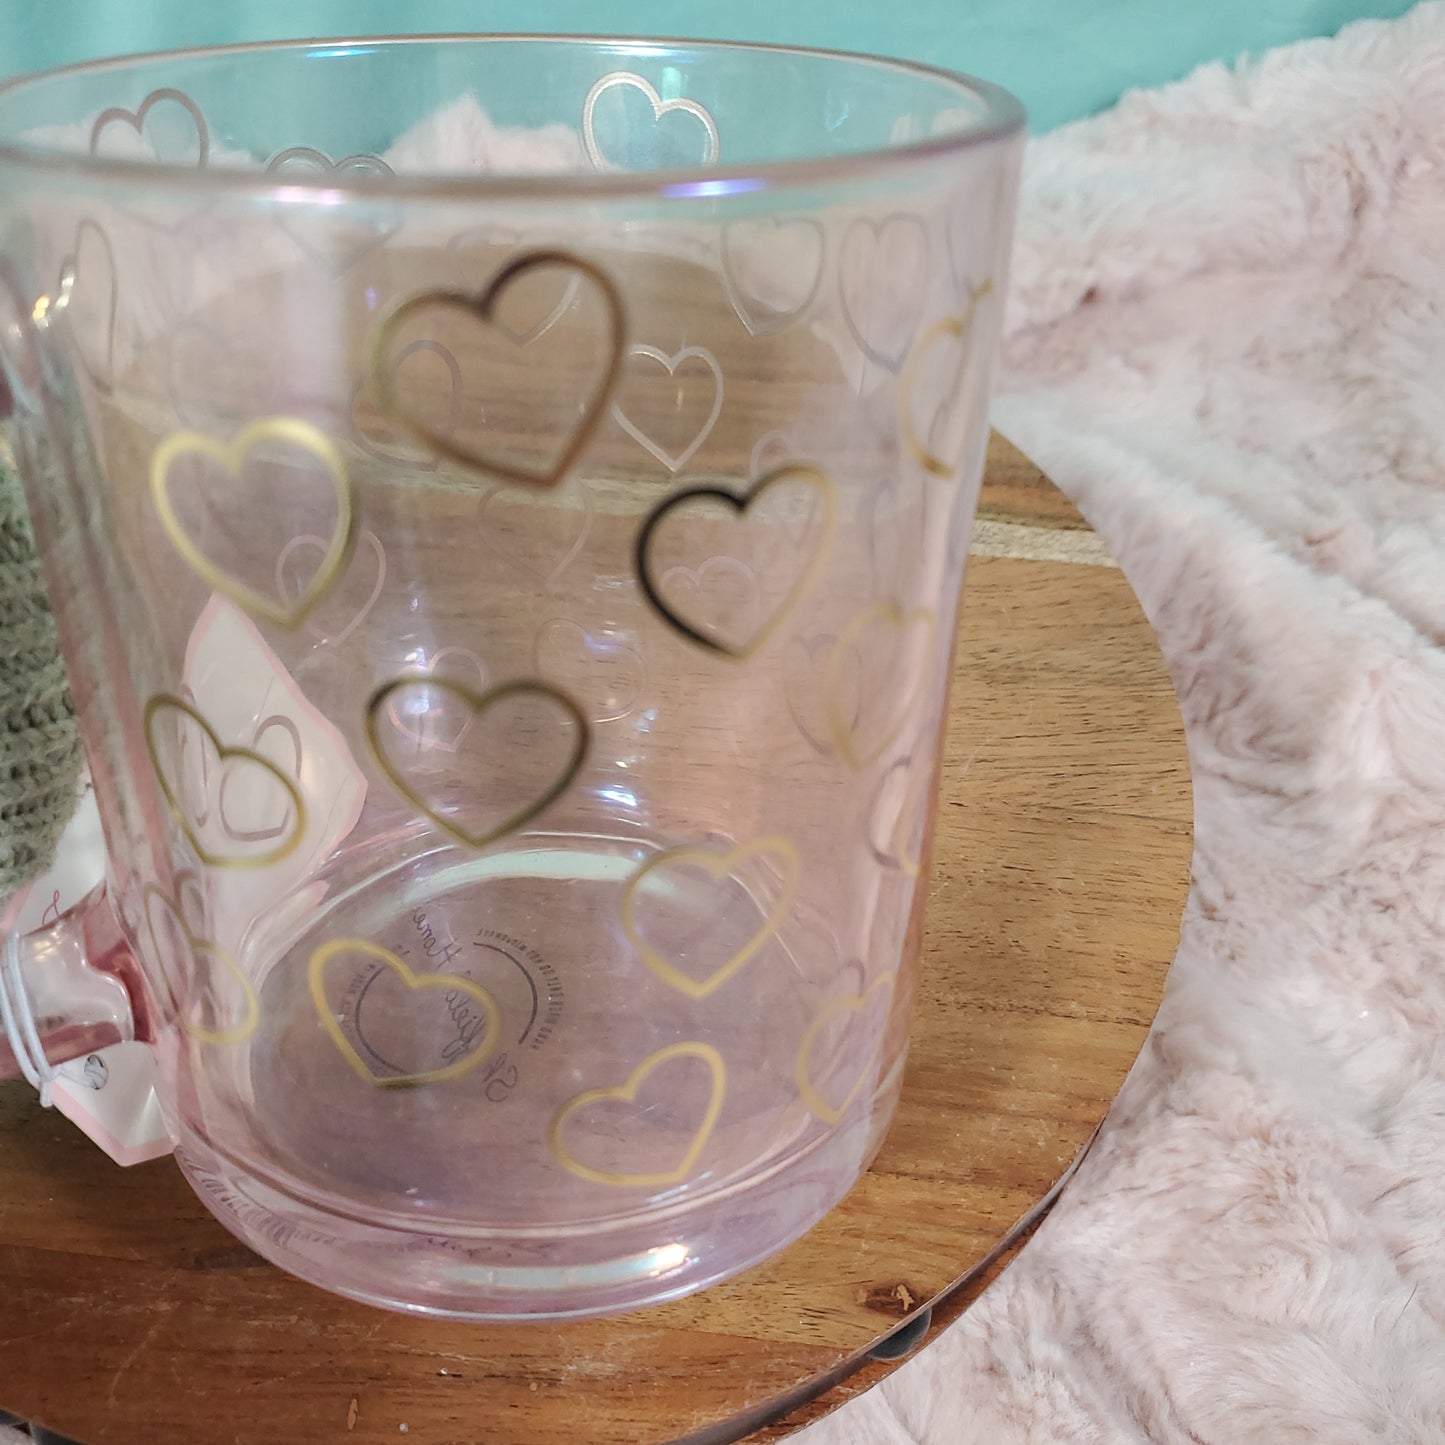 Sheffield Home Pink Glass Coffee Mug with Gold Heart Outline Design - 15oz